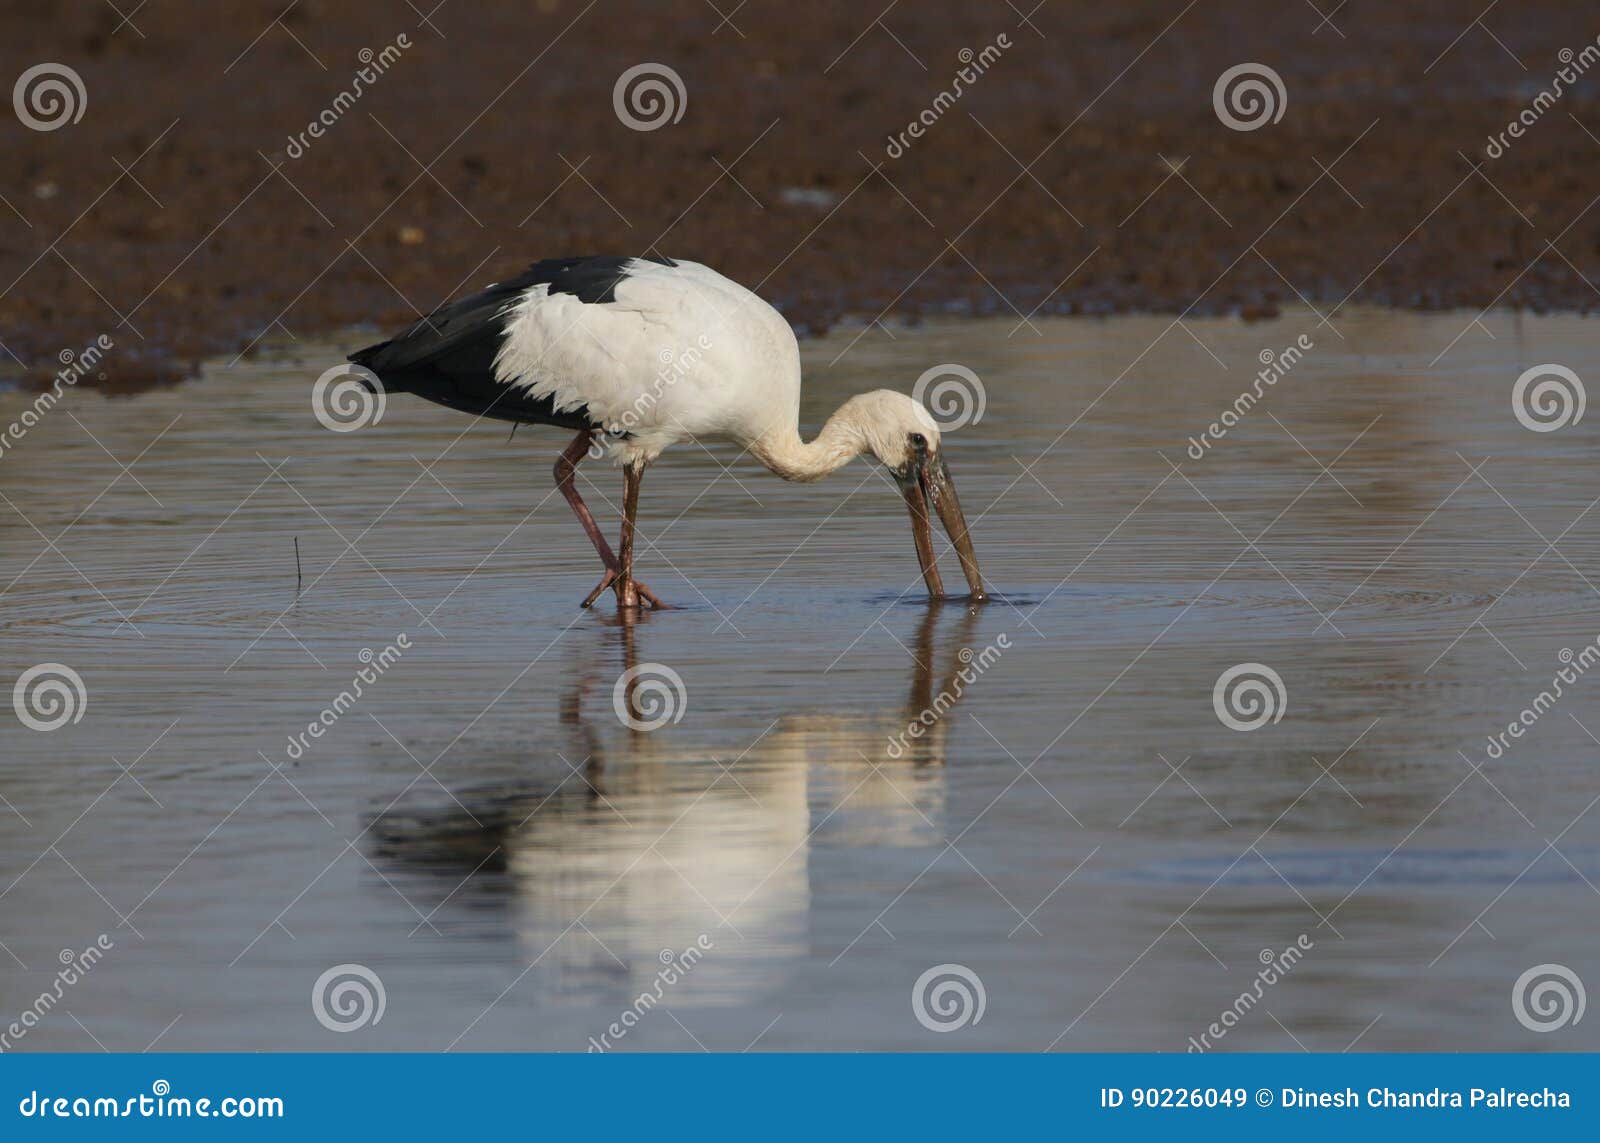 Openbill stork stock image. Image of stork, drowned, view - 90226049